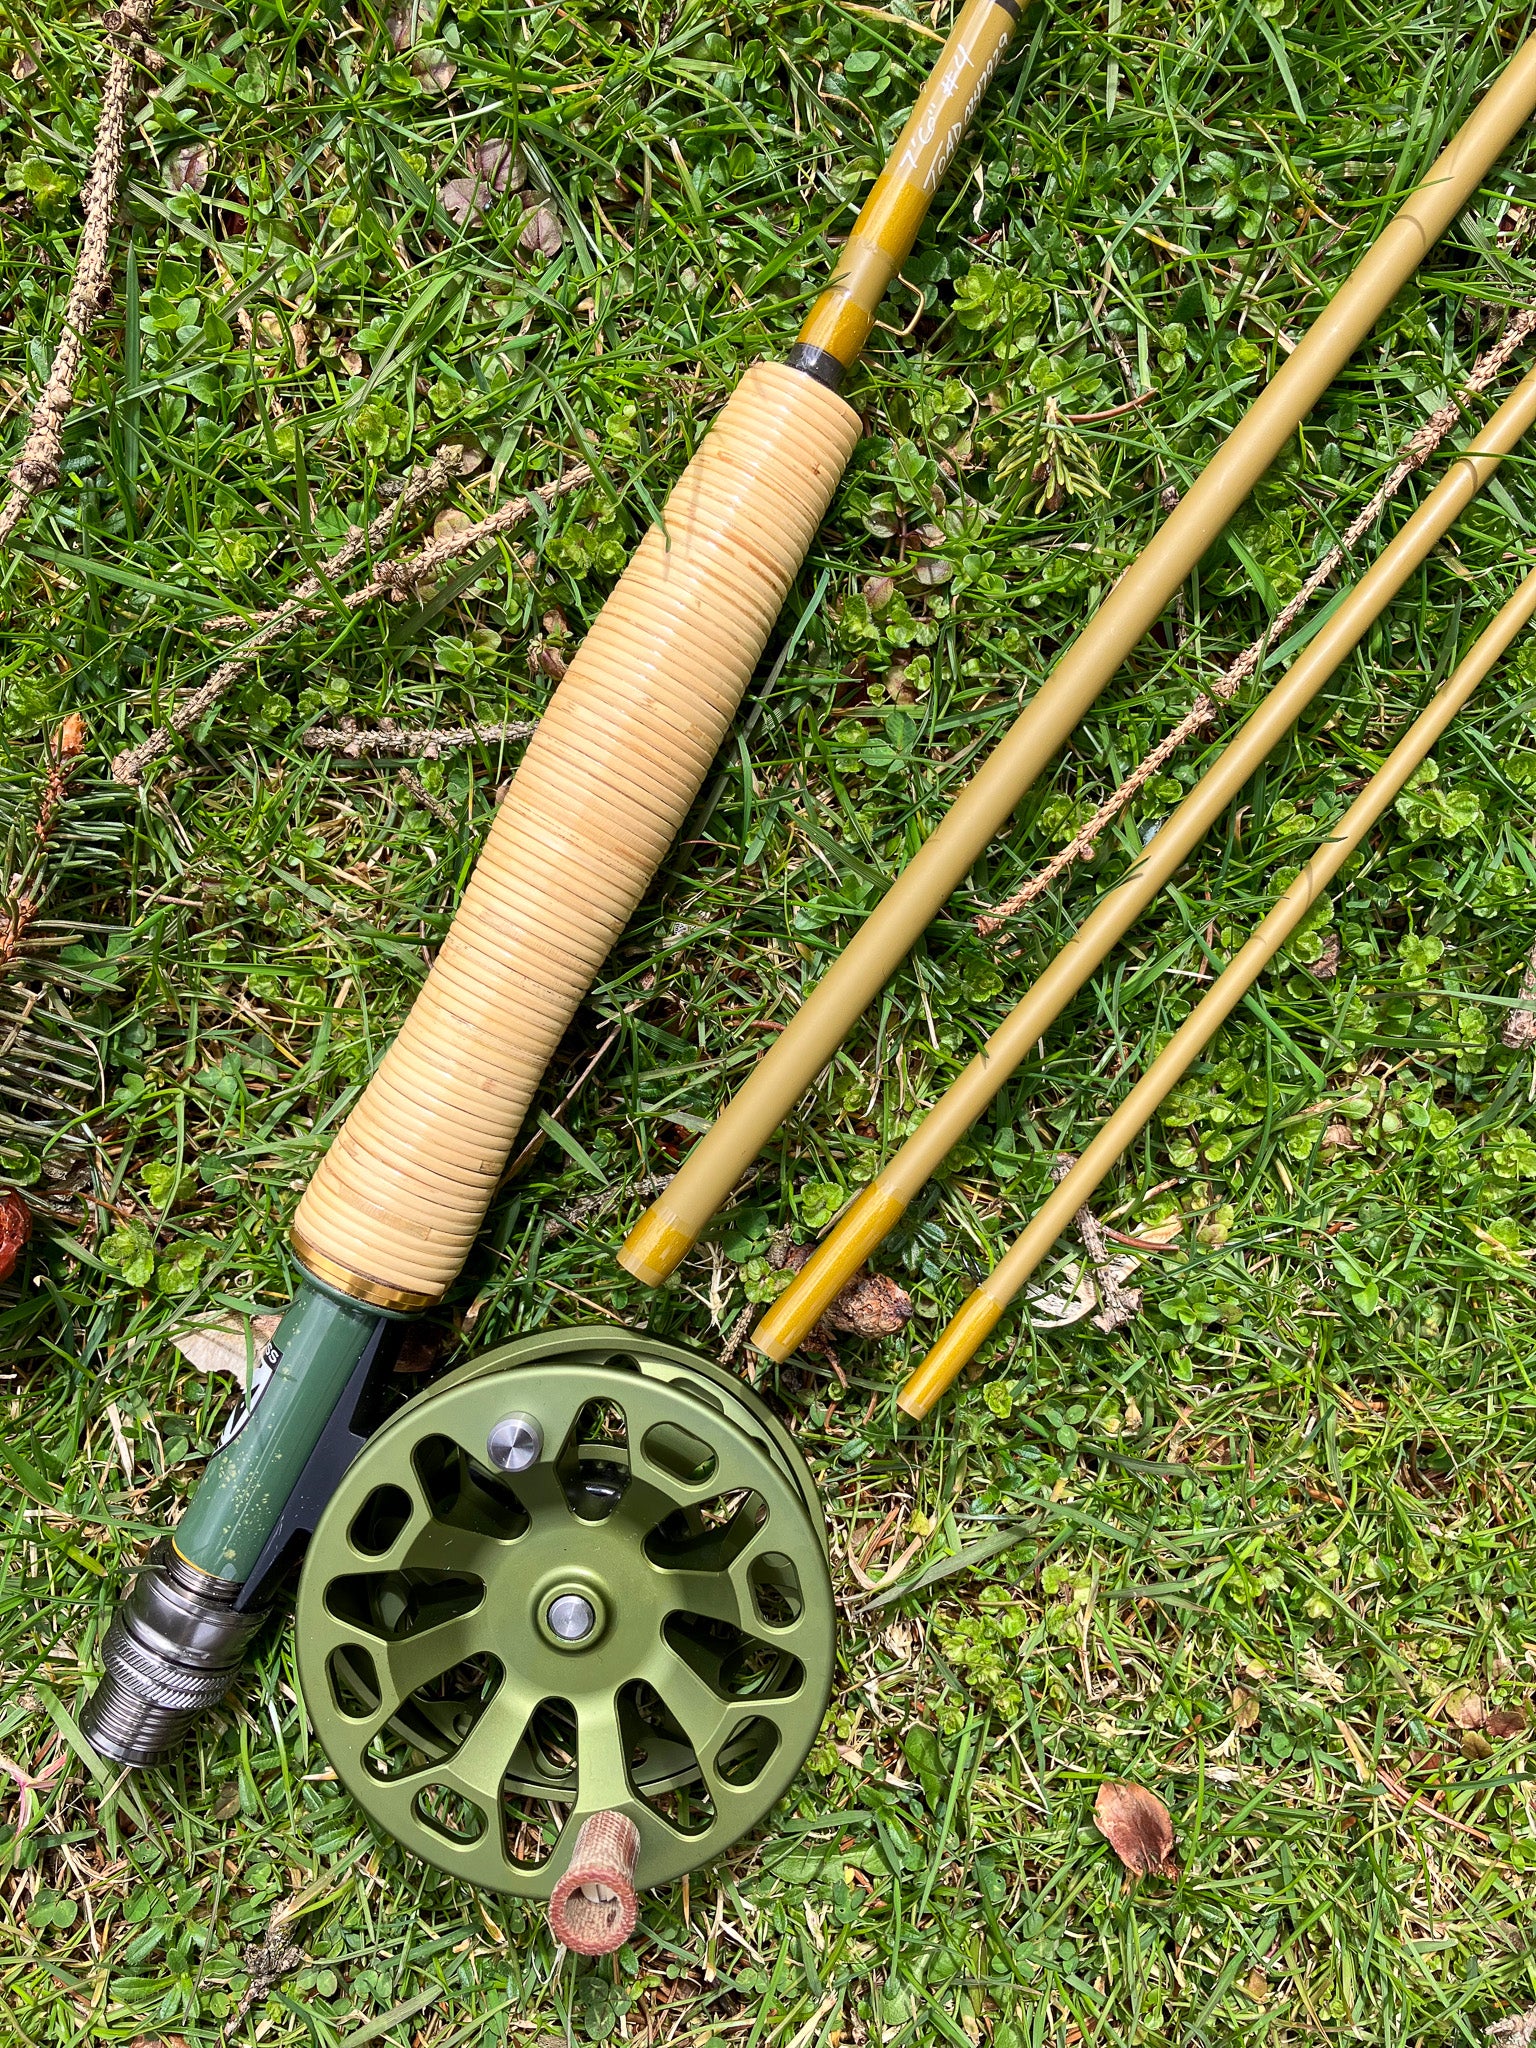 Toad 7'6 4 weight 4 piece with Rattan Grip and Ross Reel – JP